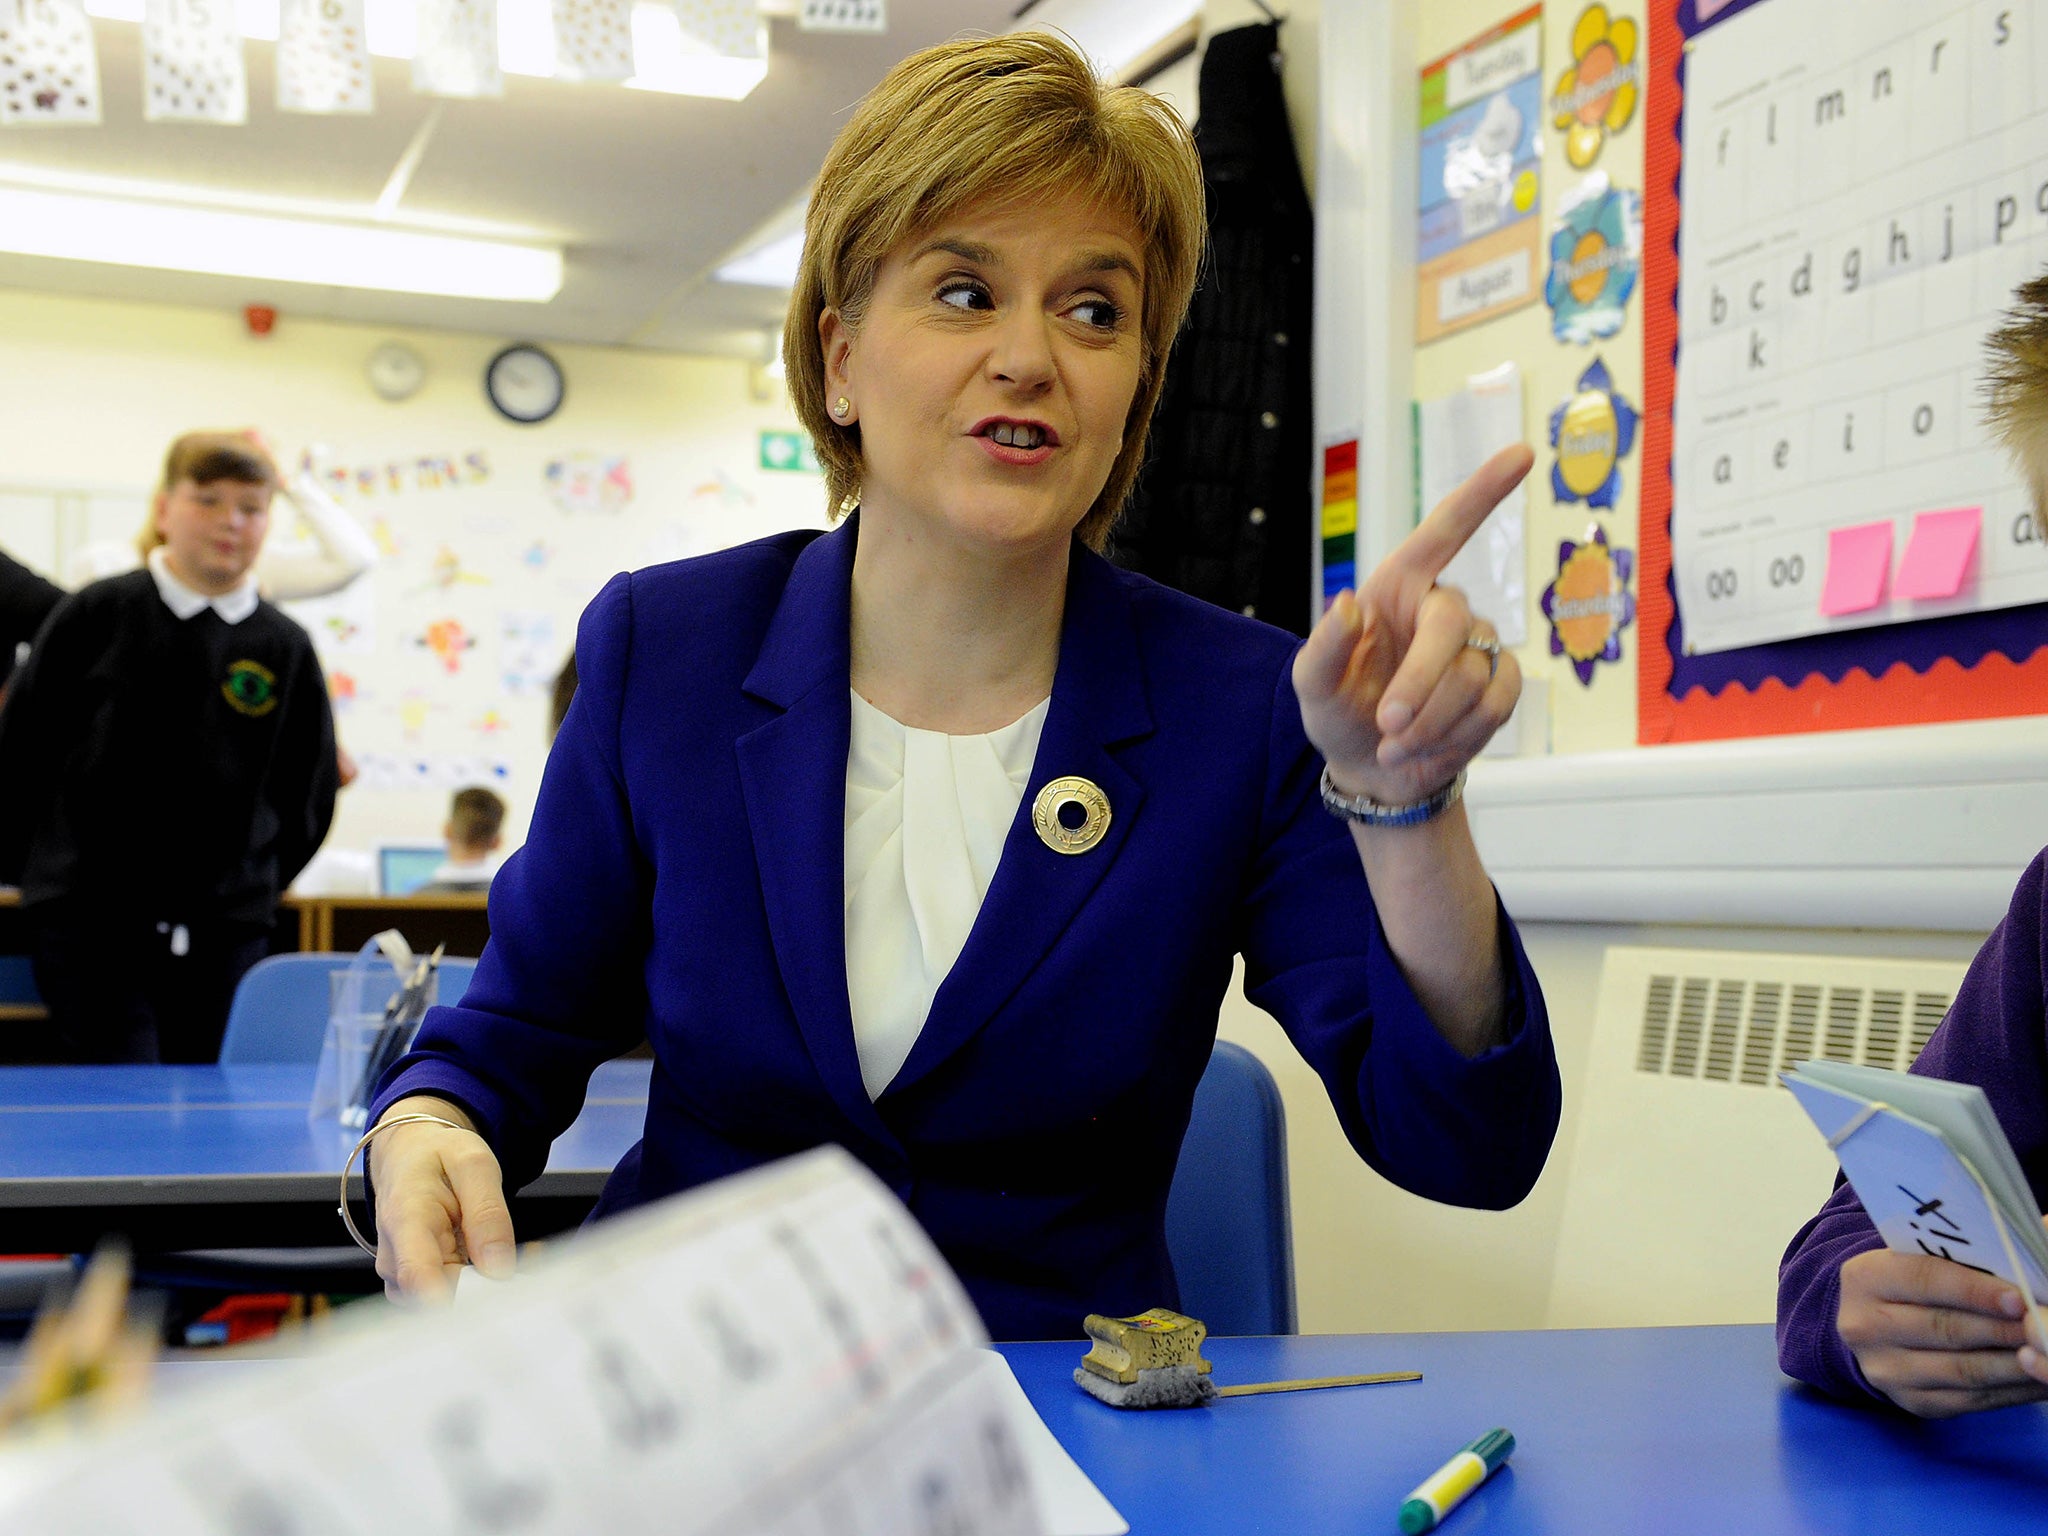 Sturgeon said that Ed Miliband's biggest problem had been ruling out working with the SNP